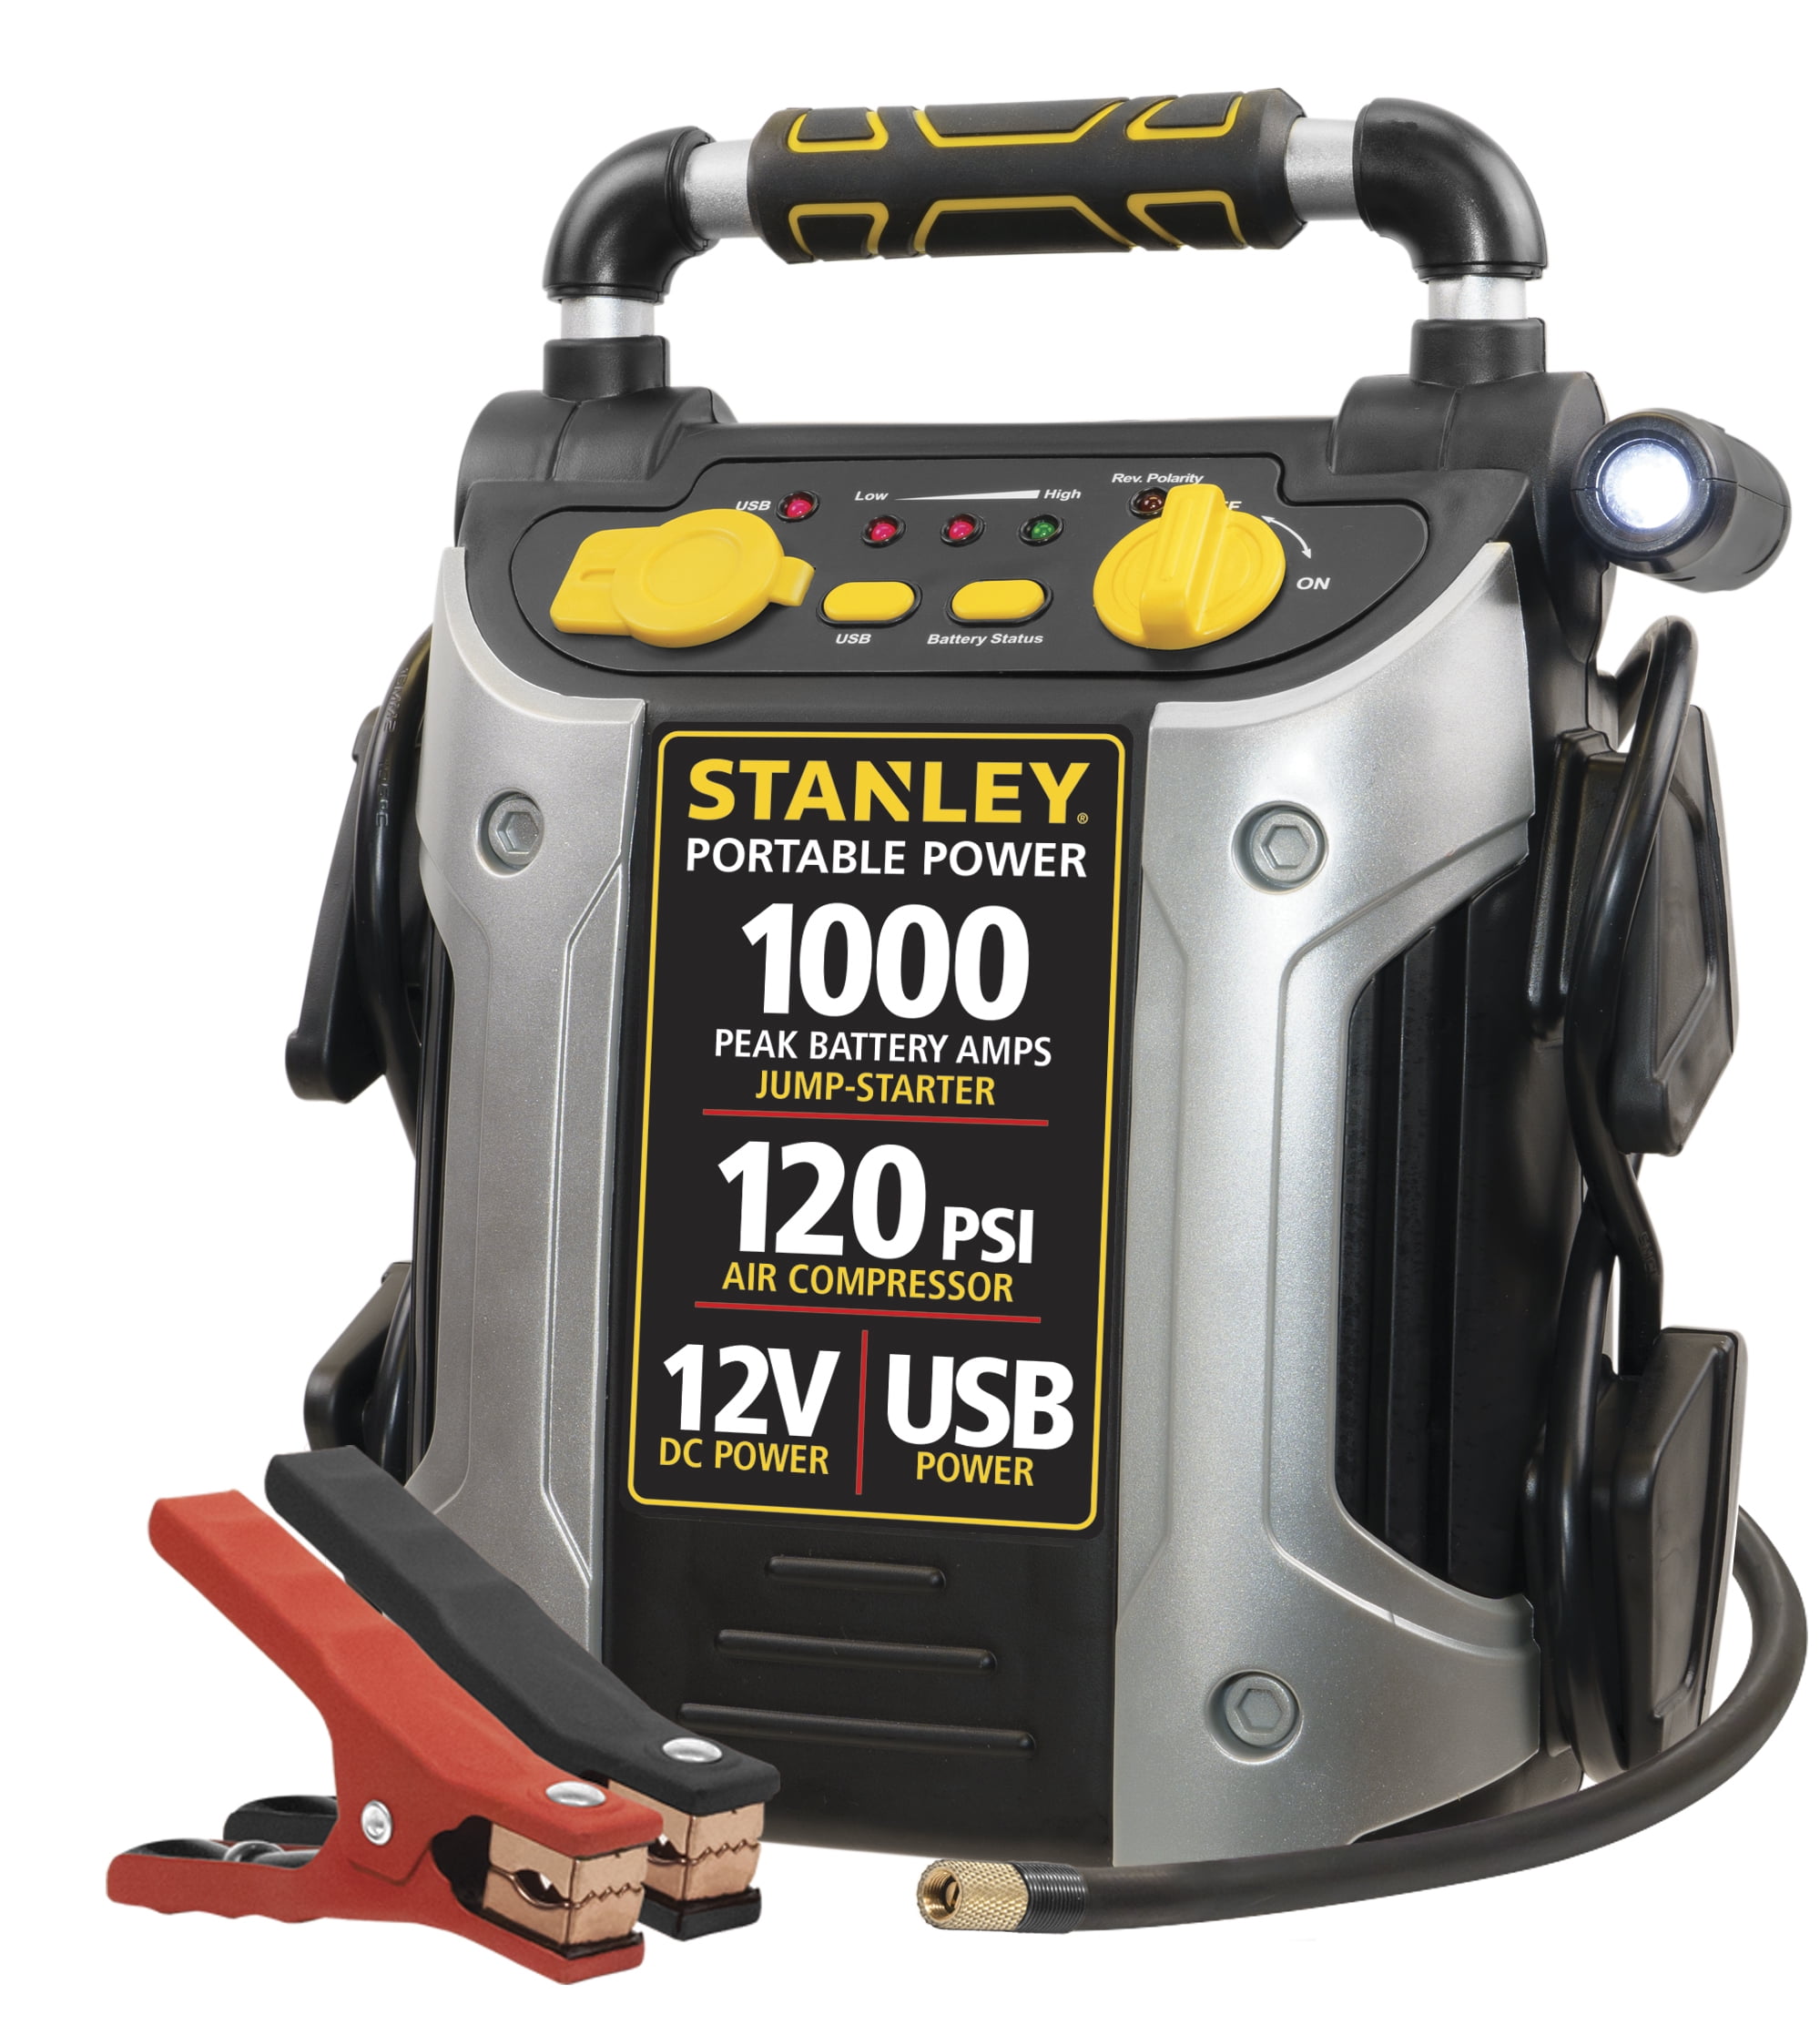 Compressor Compact Length 202.9oz Electric Portable Stanley Dn 200/8/6 1.5 HP 8016738703788 